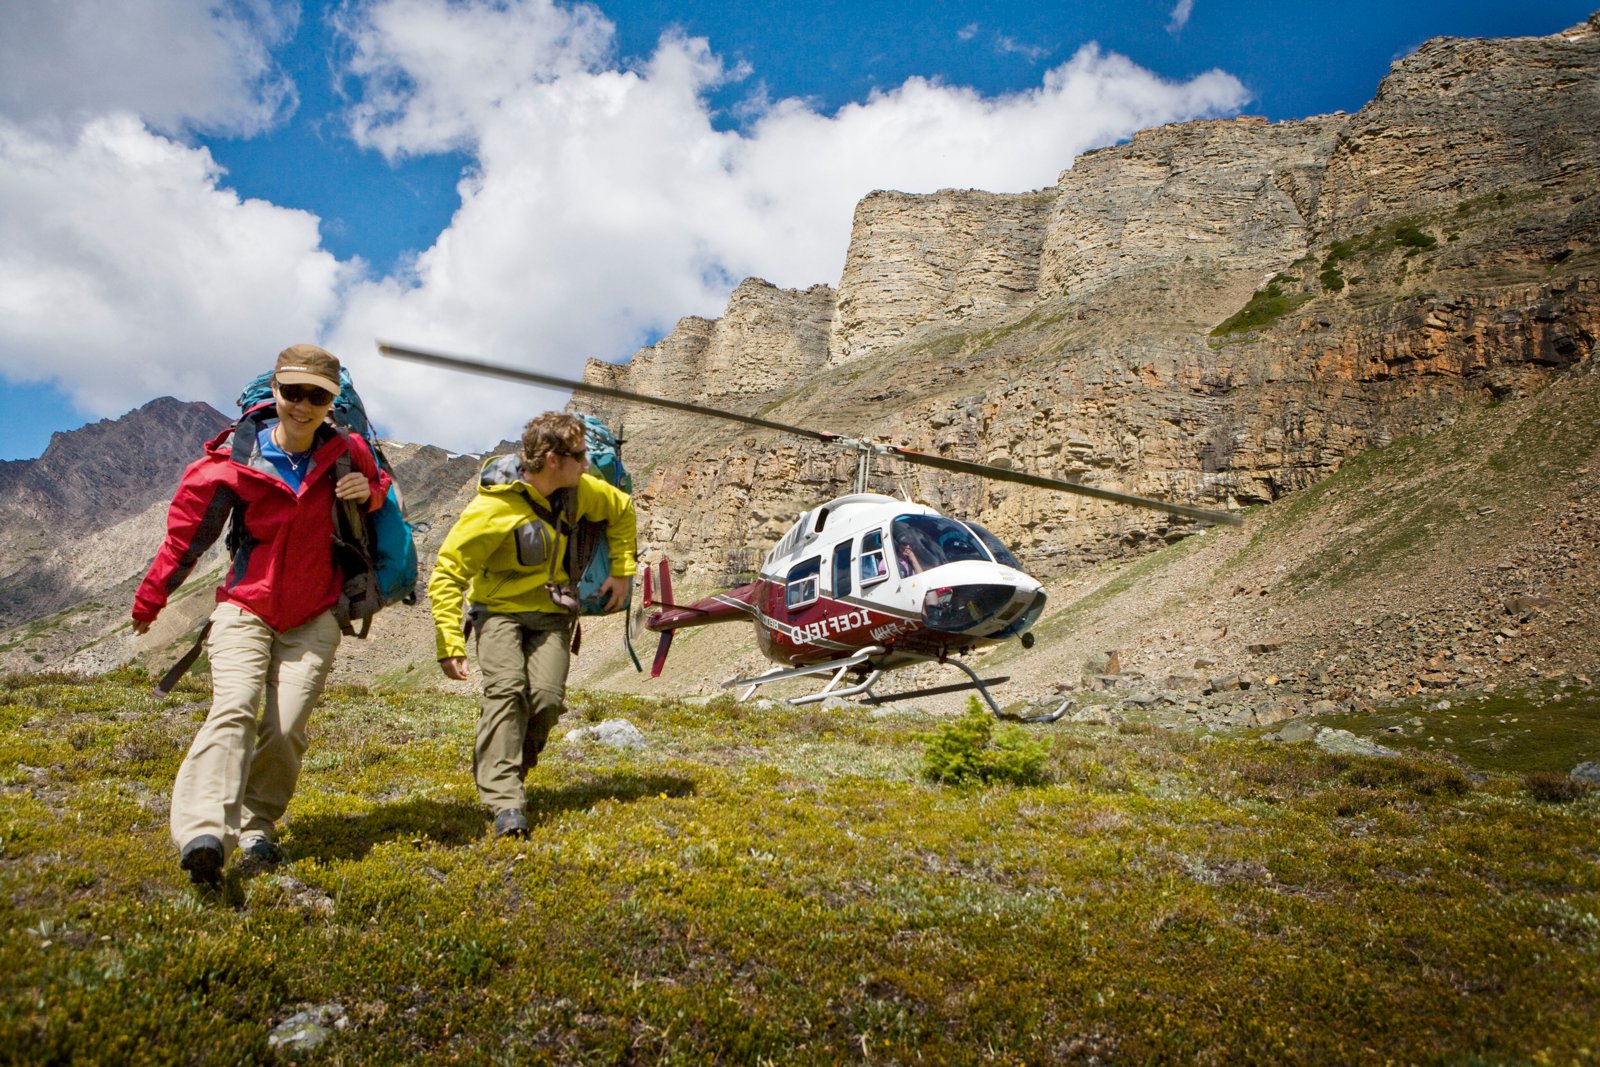 Two people crouched as they walk away from a running helicopter that landed in the alpine of the mountains.